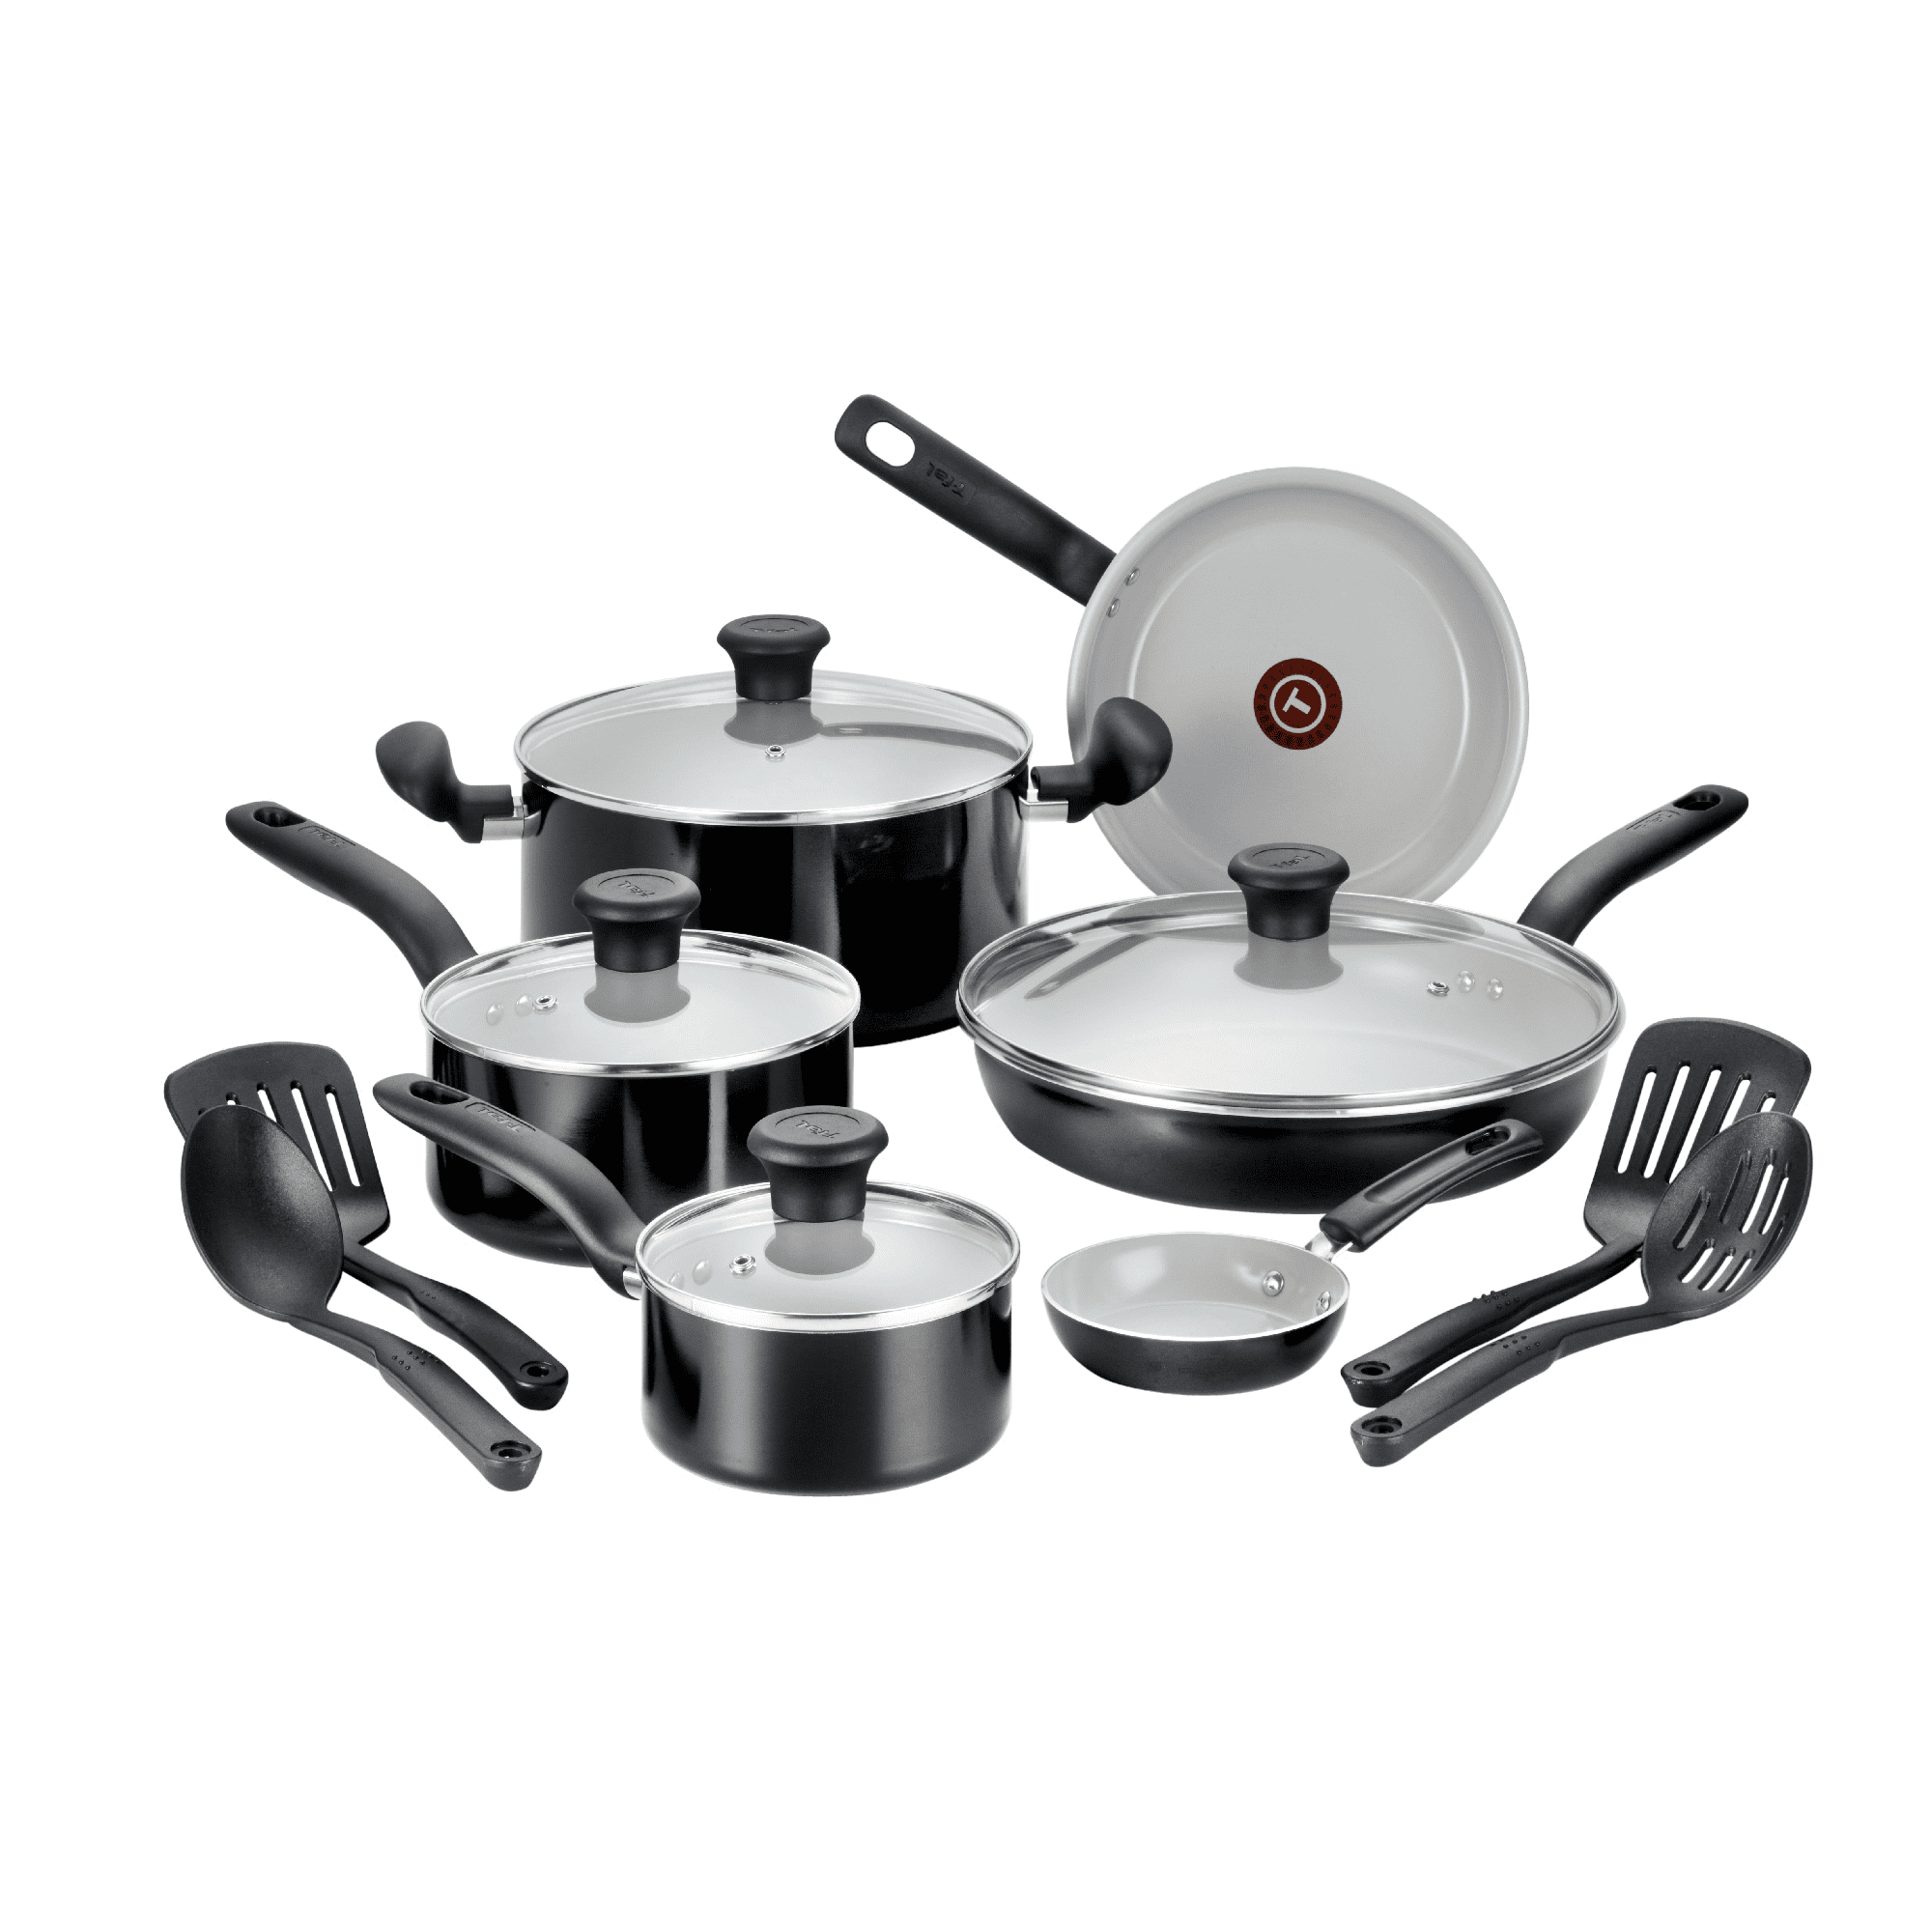 Best Ceramic Cookware Sets of 2022 — Top Ceramic Pans for Every